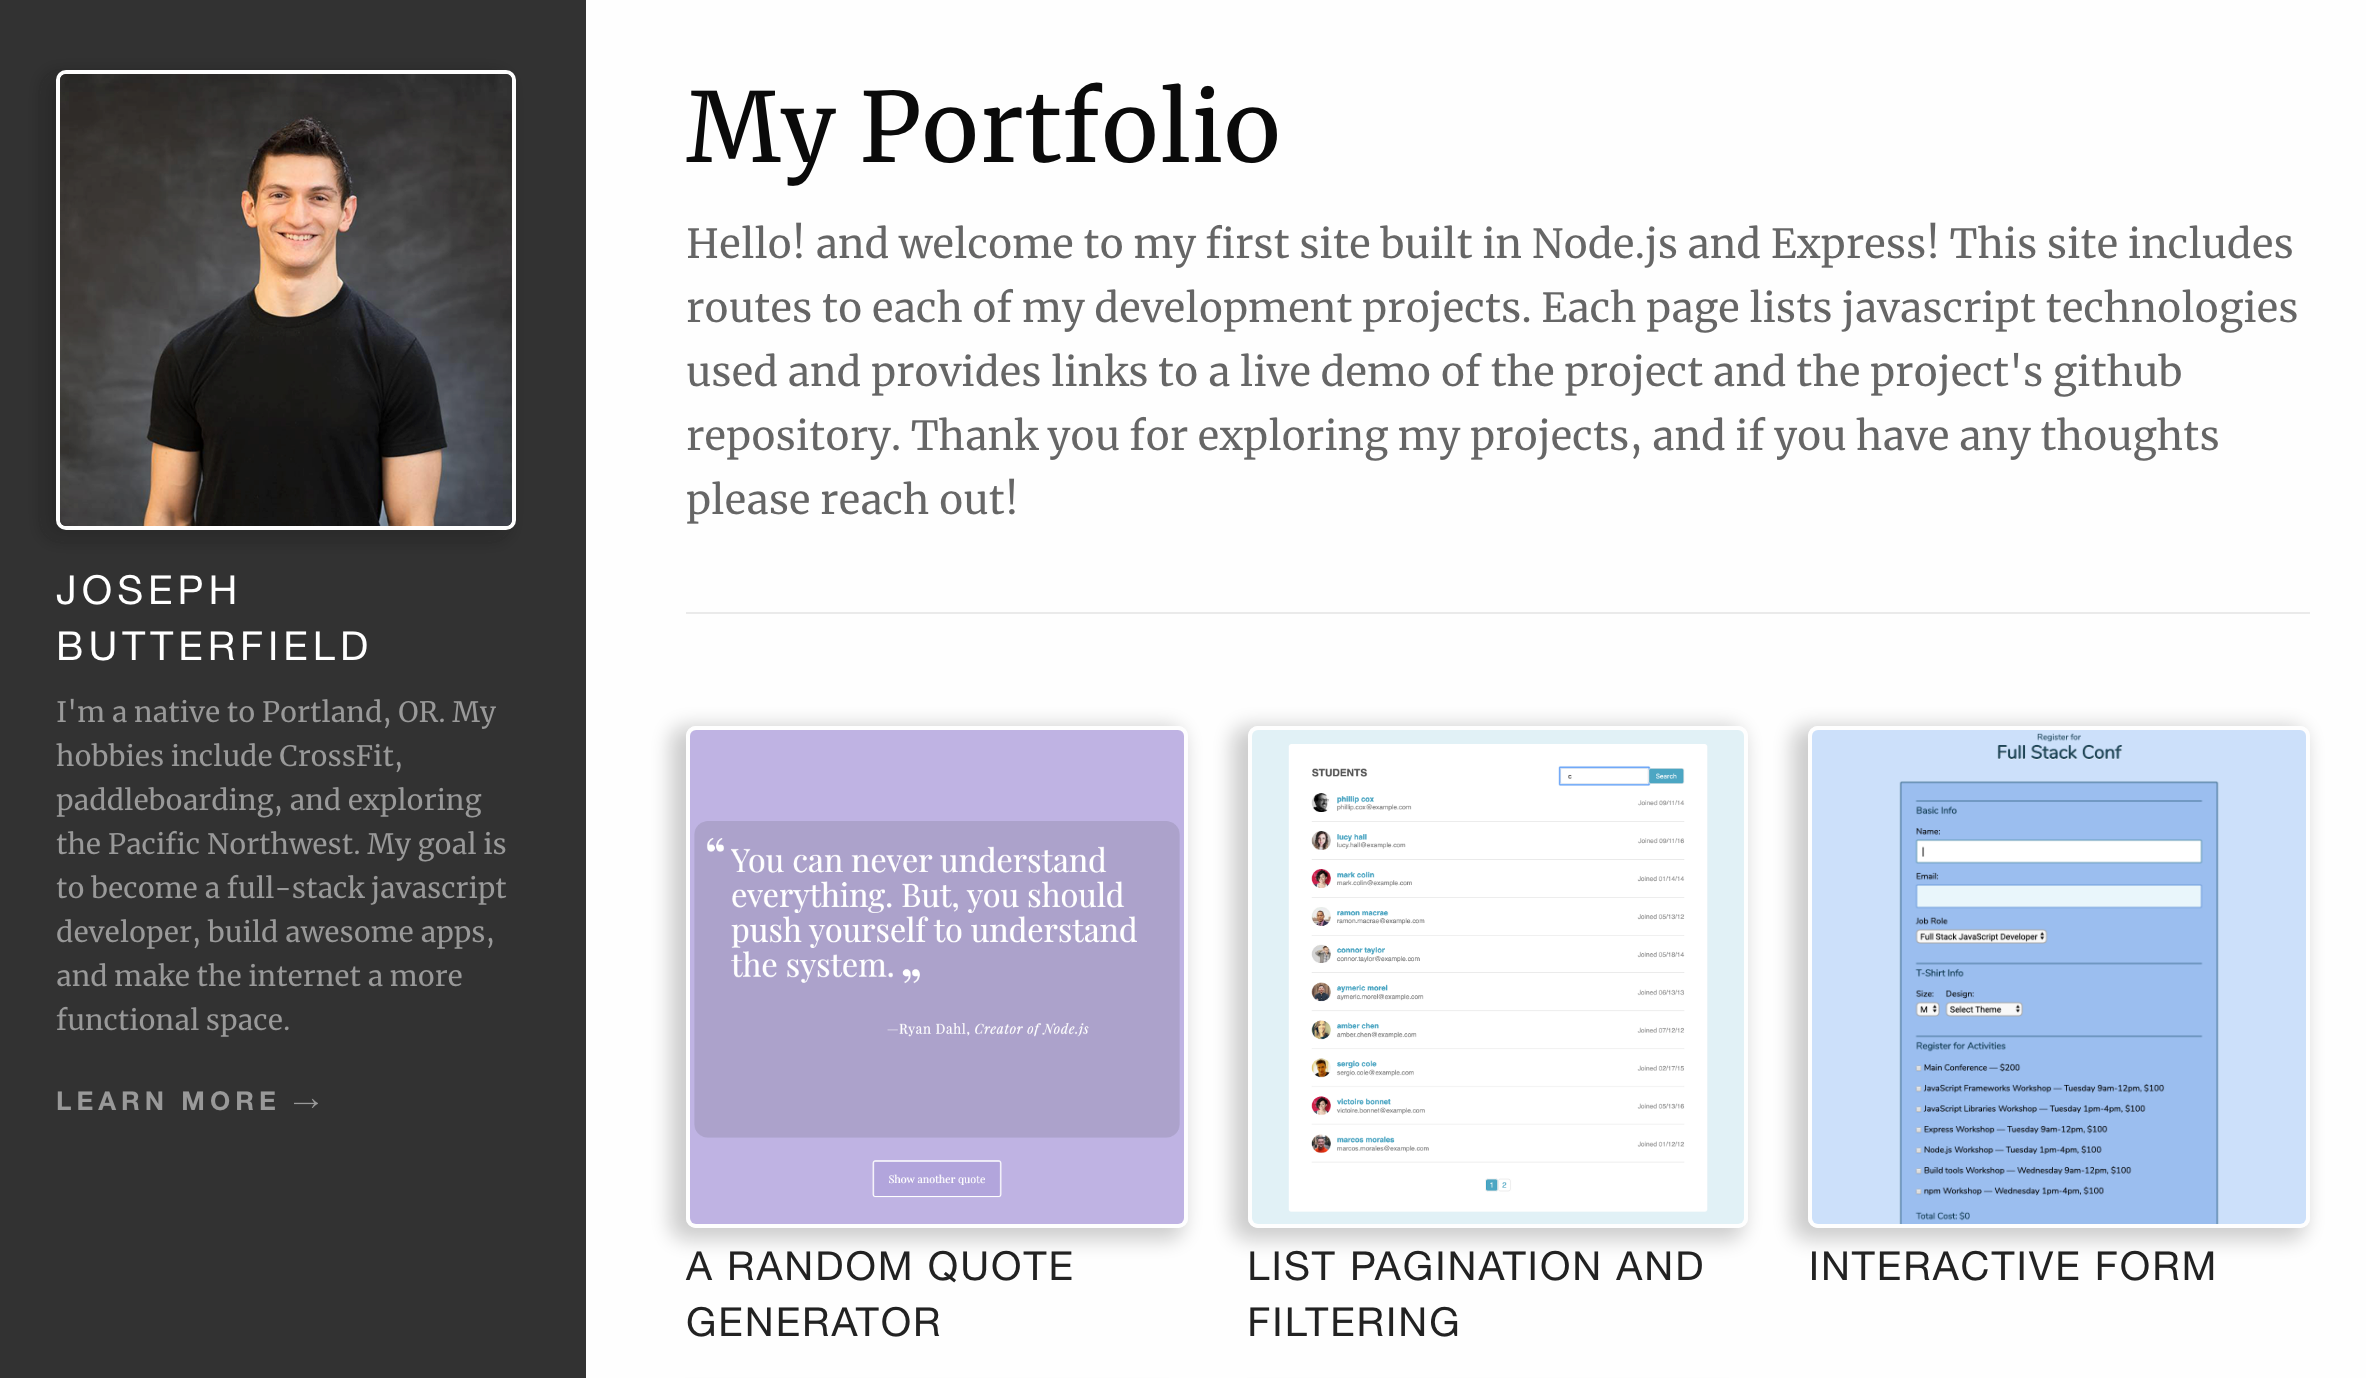 A simple portfolio site I built with Node.js and Express and the Pug templating engine.